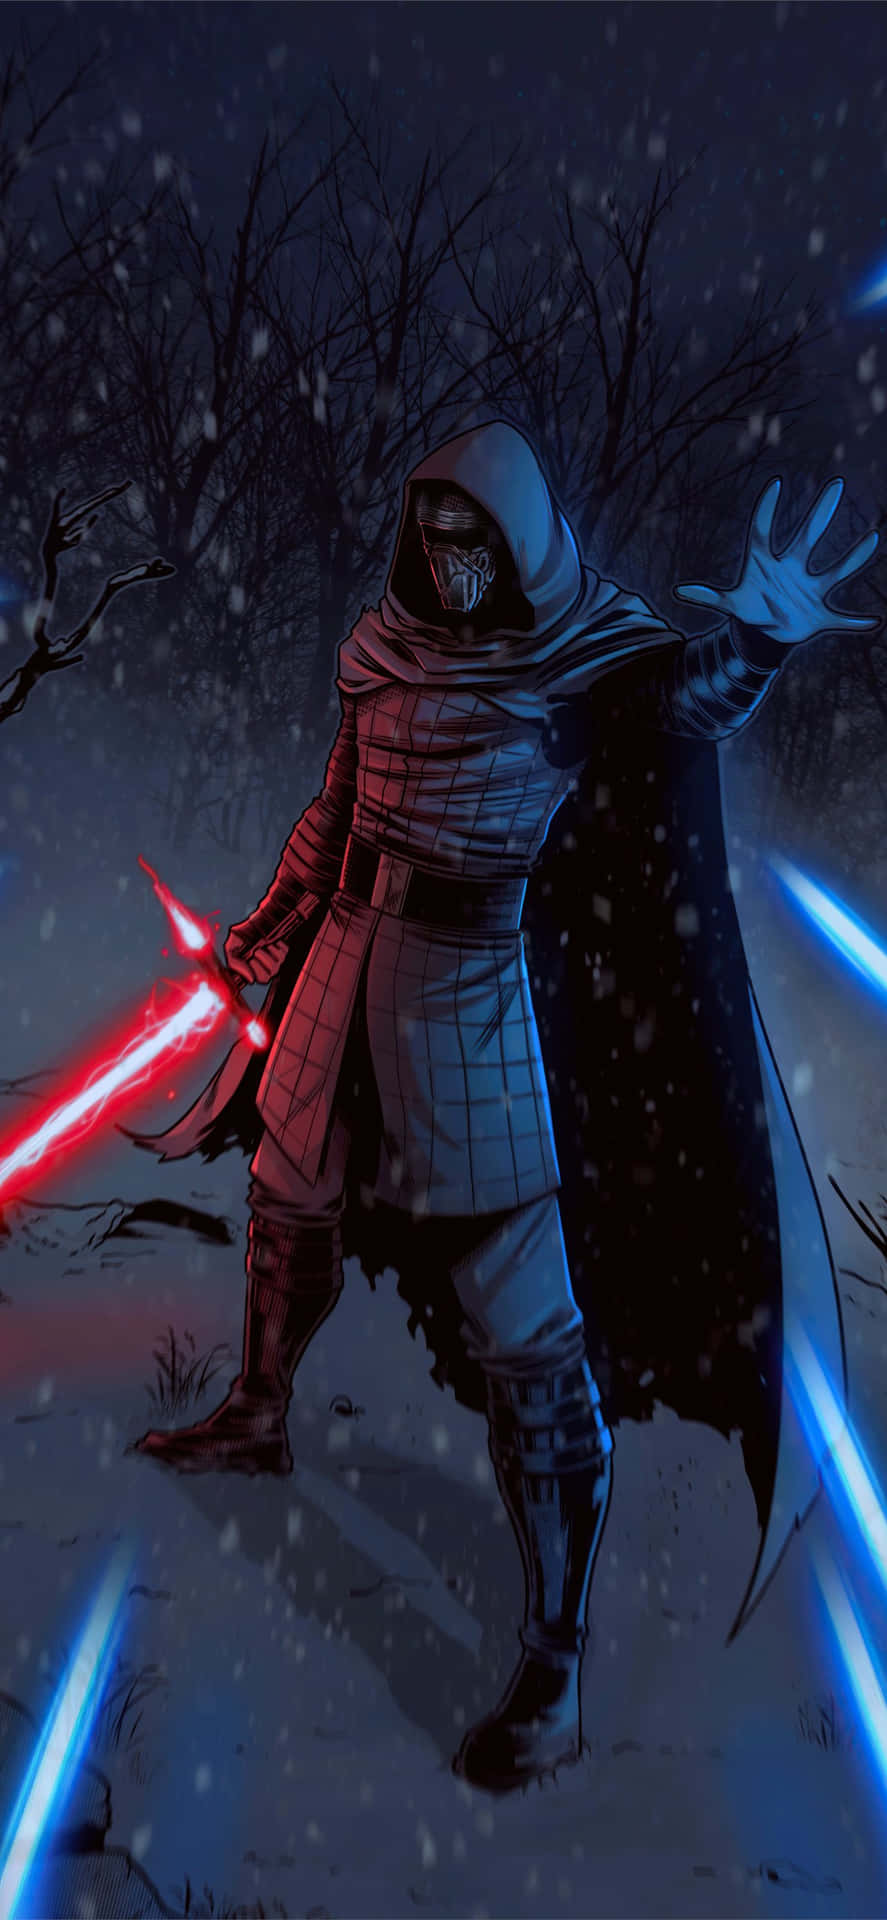 "Check out this awesome Kylo Ren iPhone wallpaper" Wallpaper